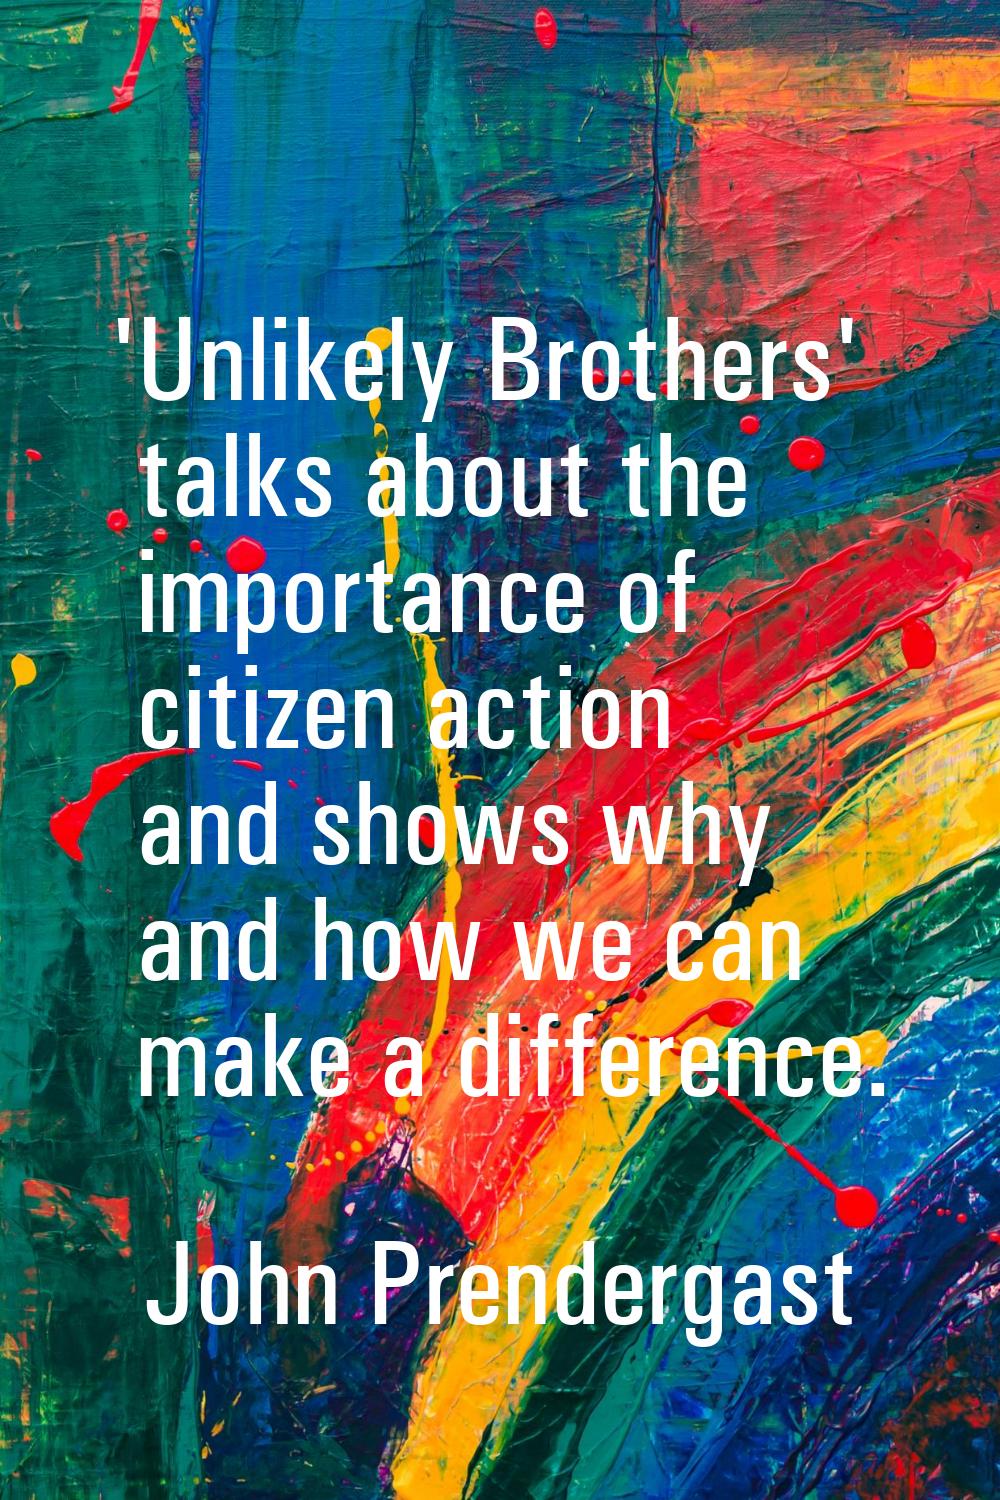 'Unlikely Brothers' talks about the importance of citizen action and shows why and how we can make 